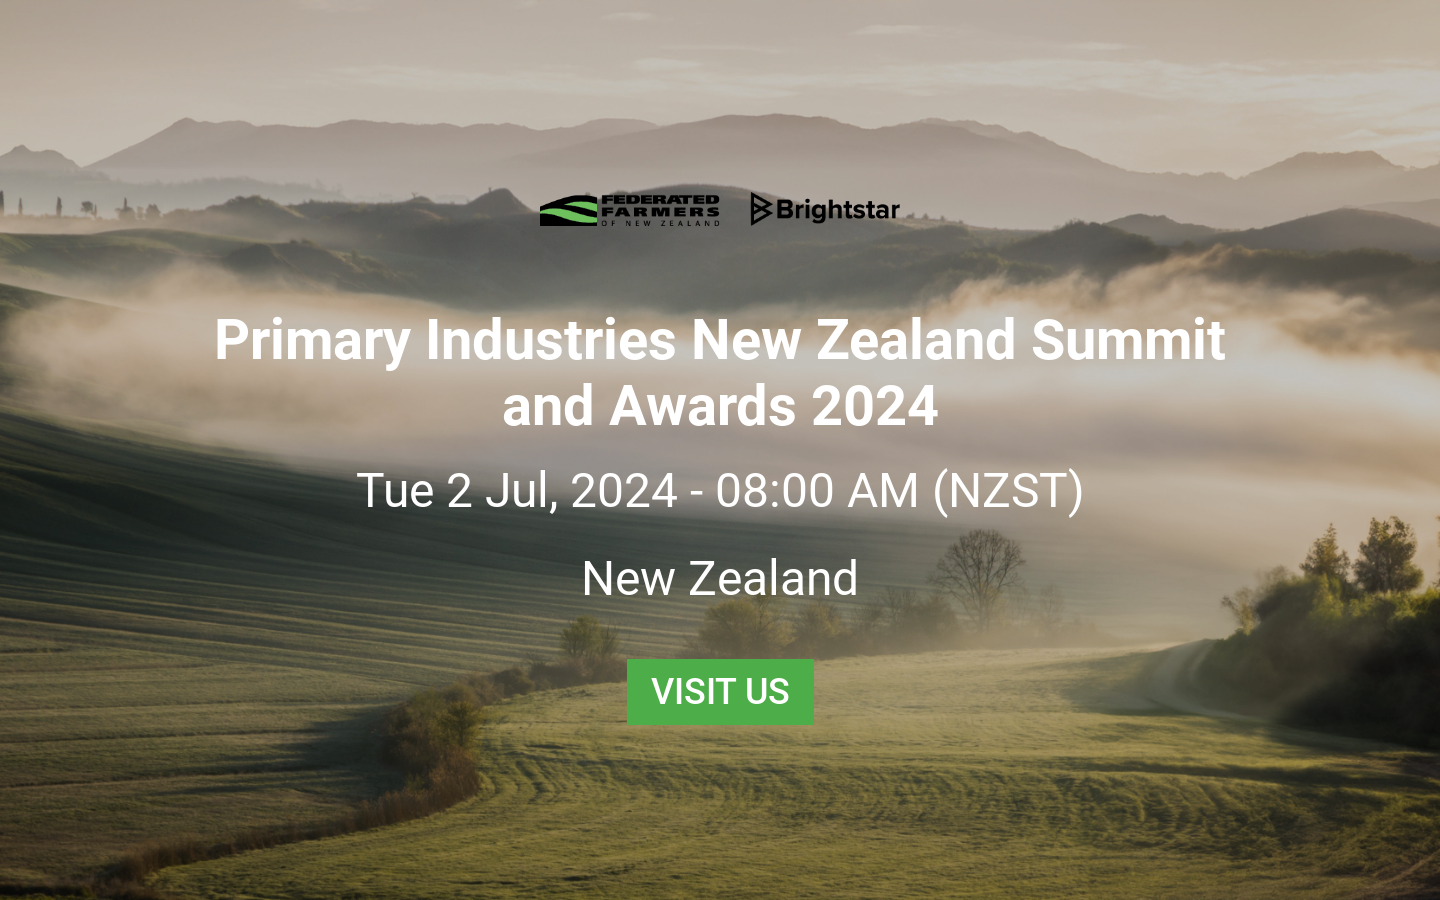 Primary Industries New Zealand Summit and Awards 2024